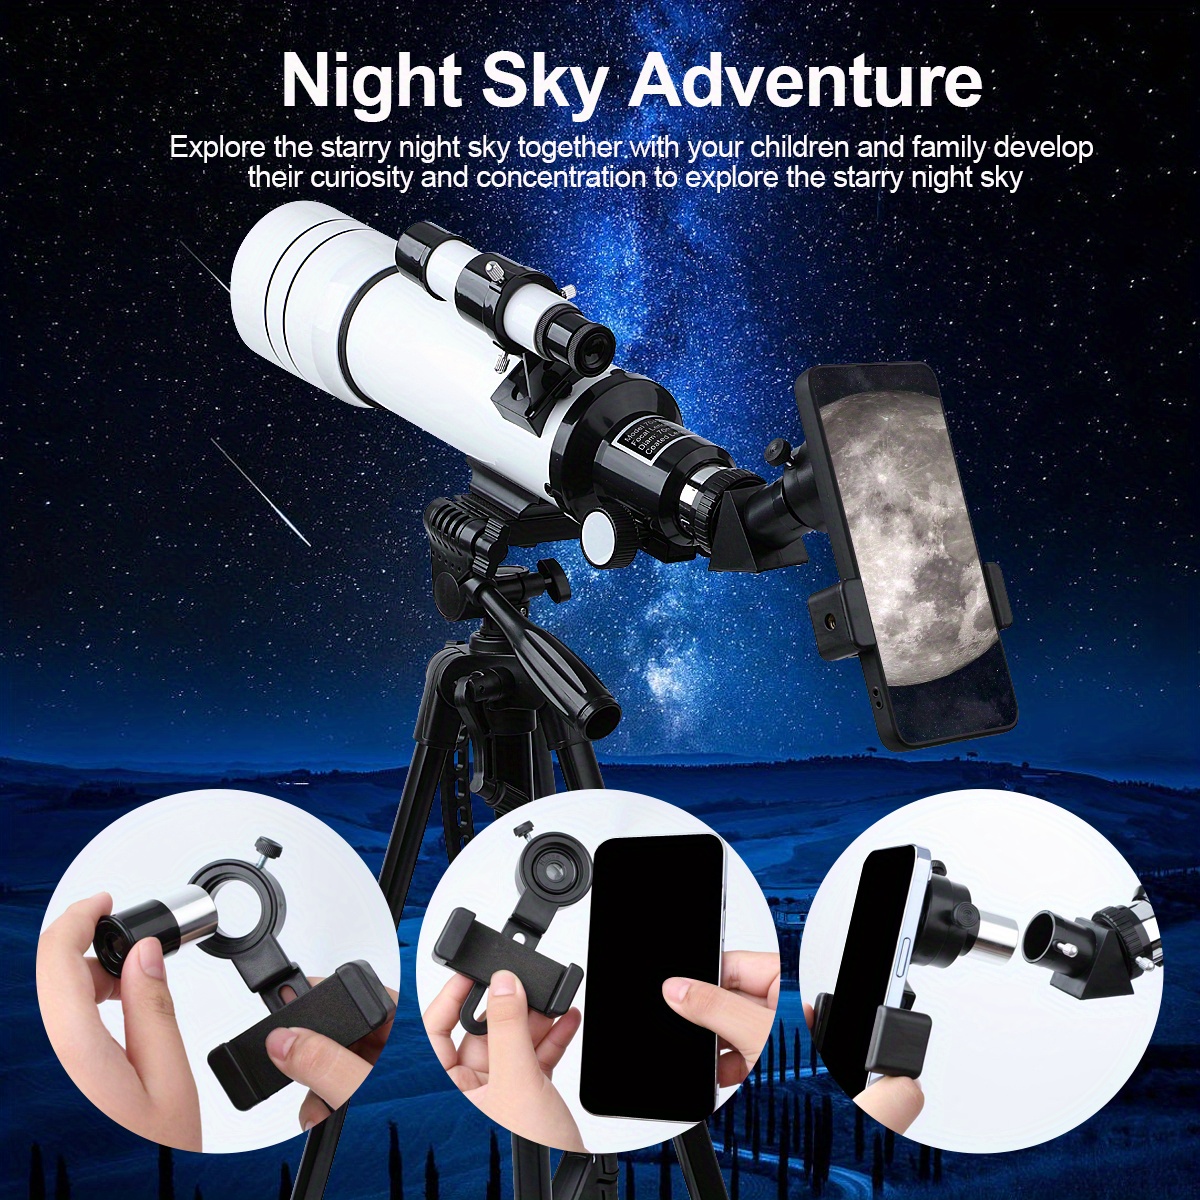 FreeSoldier Professional Telescope, 70mm Aperture, High Magnification, Day & Night Usage